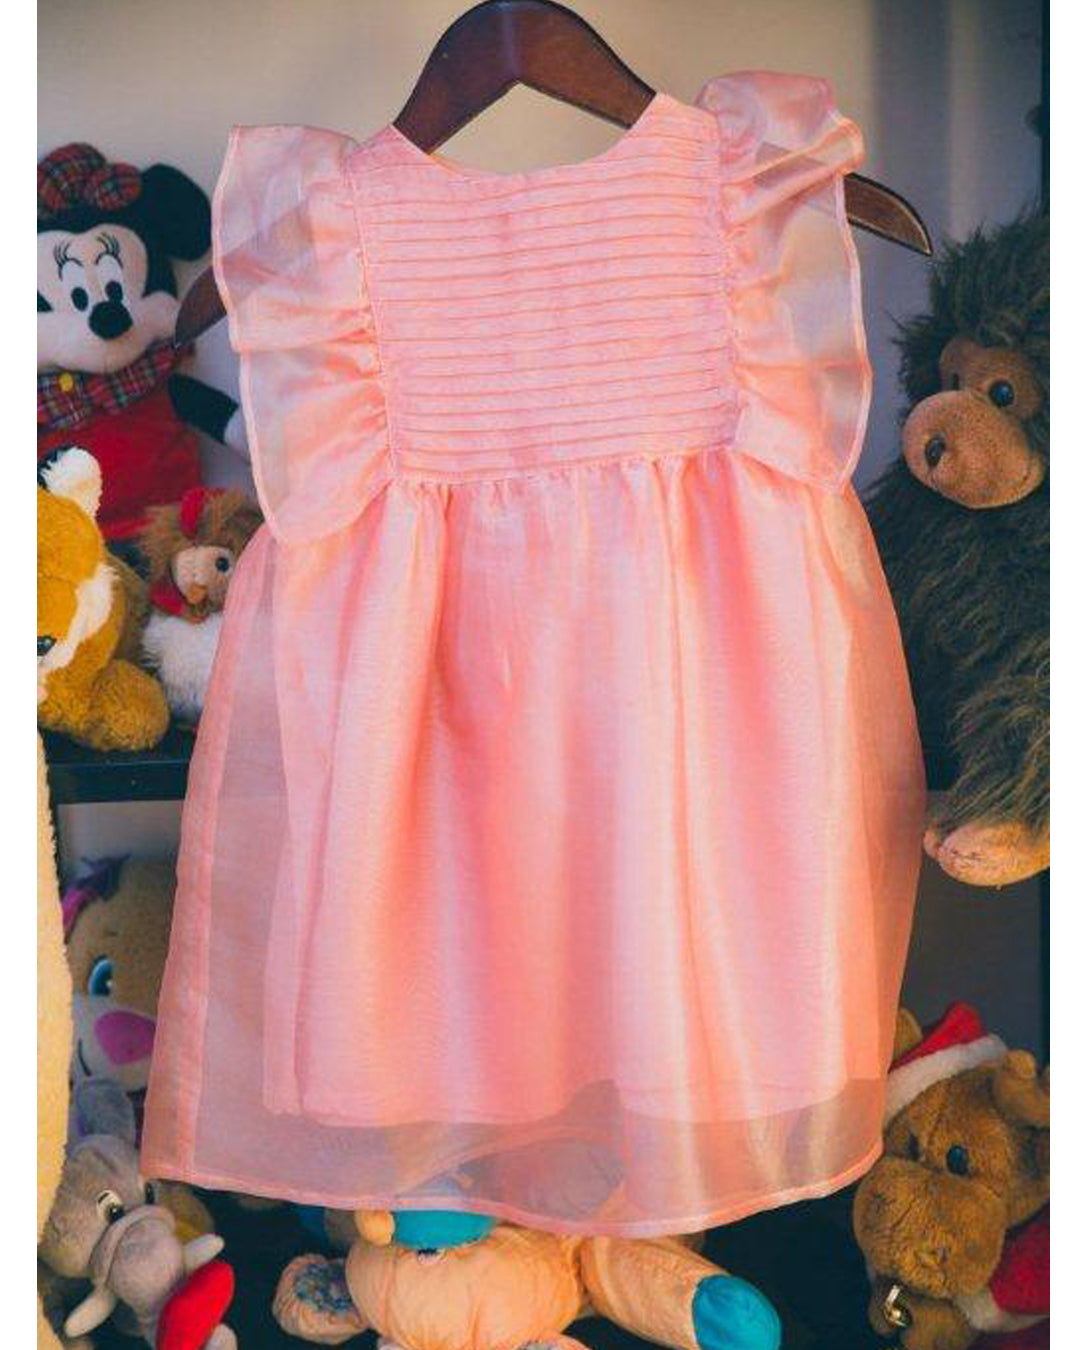 PEACH BIRTHDAY GIRL DRESS WITH DELICATE FRILLS